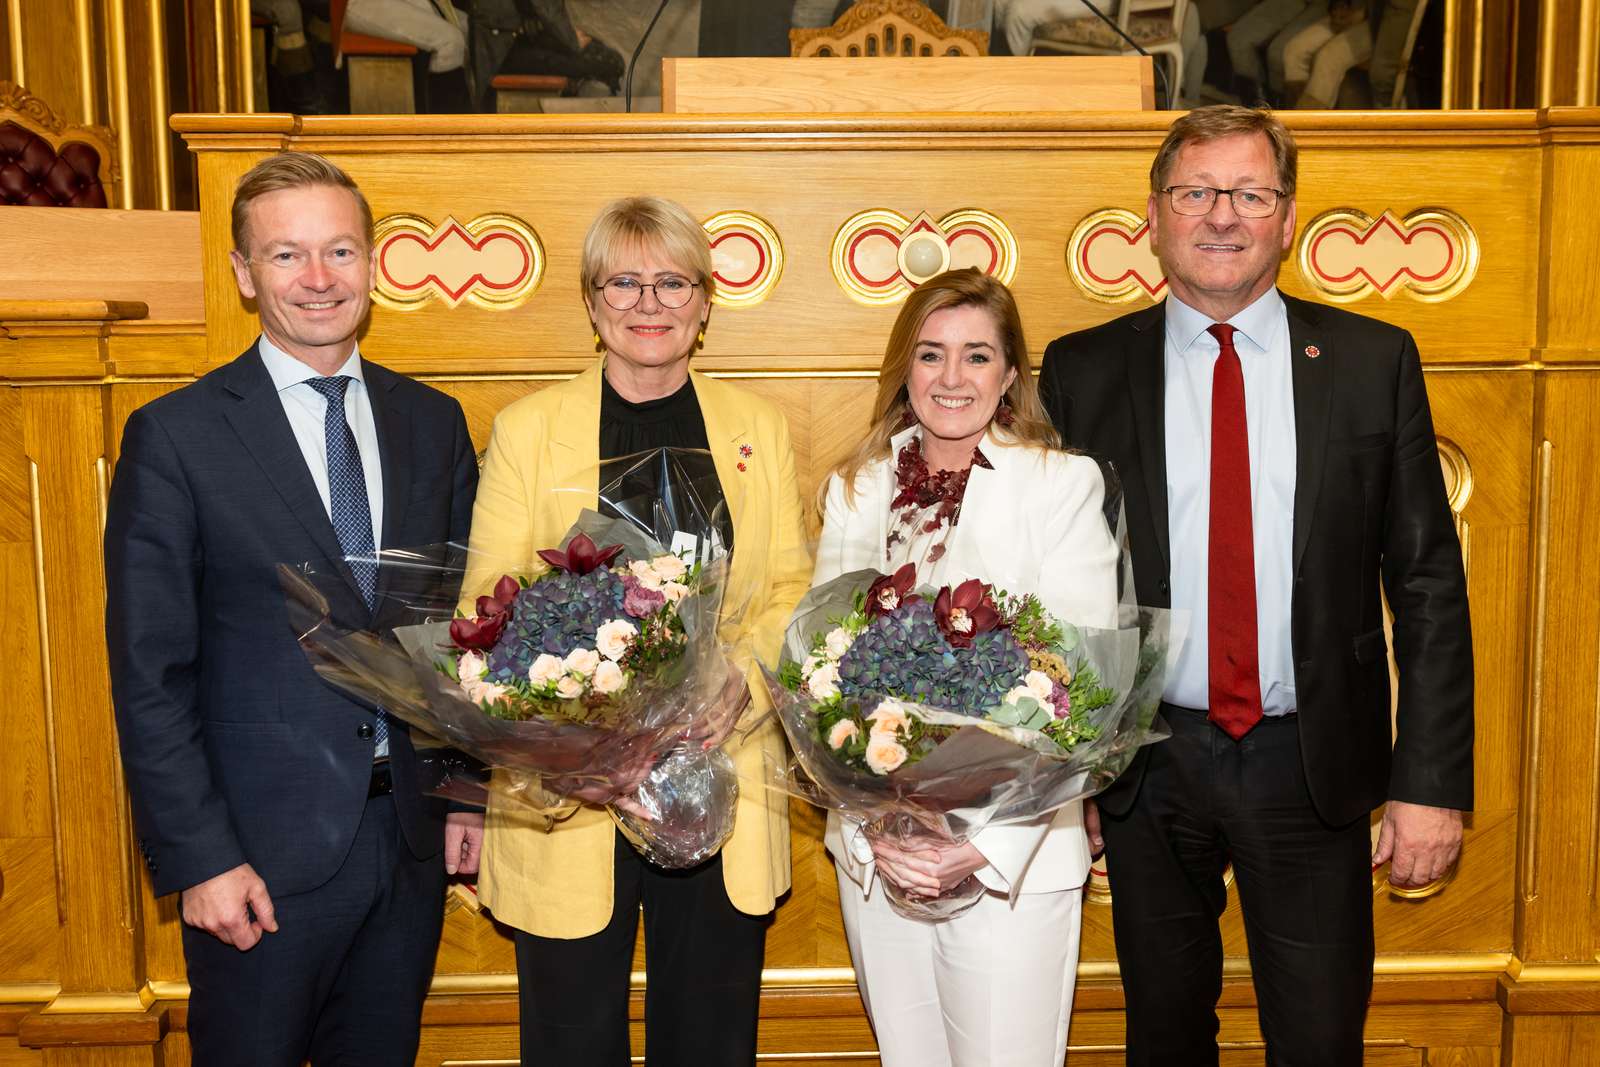 Presidents of the Nordic Council